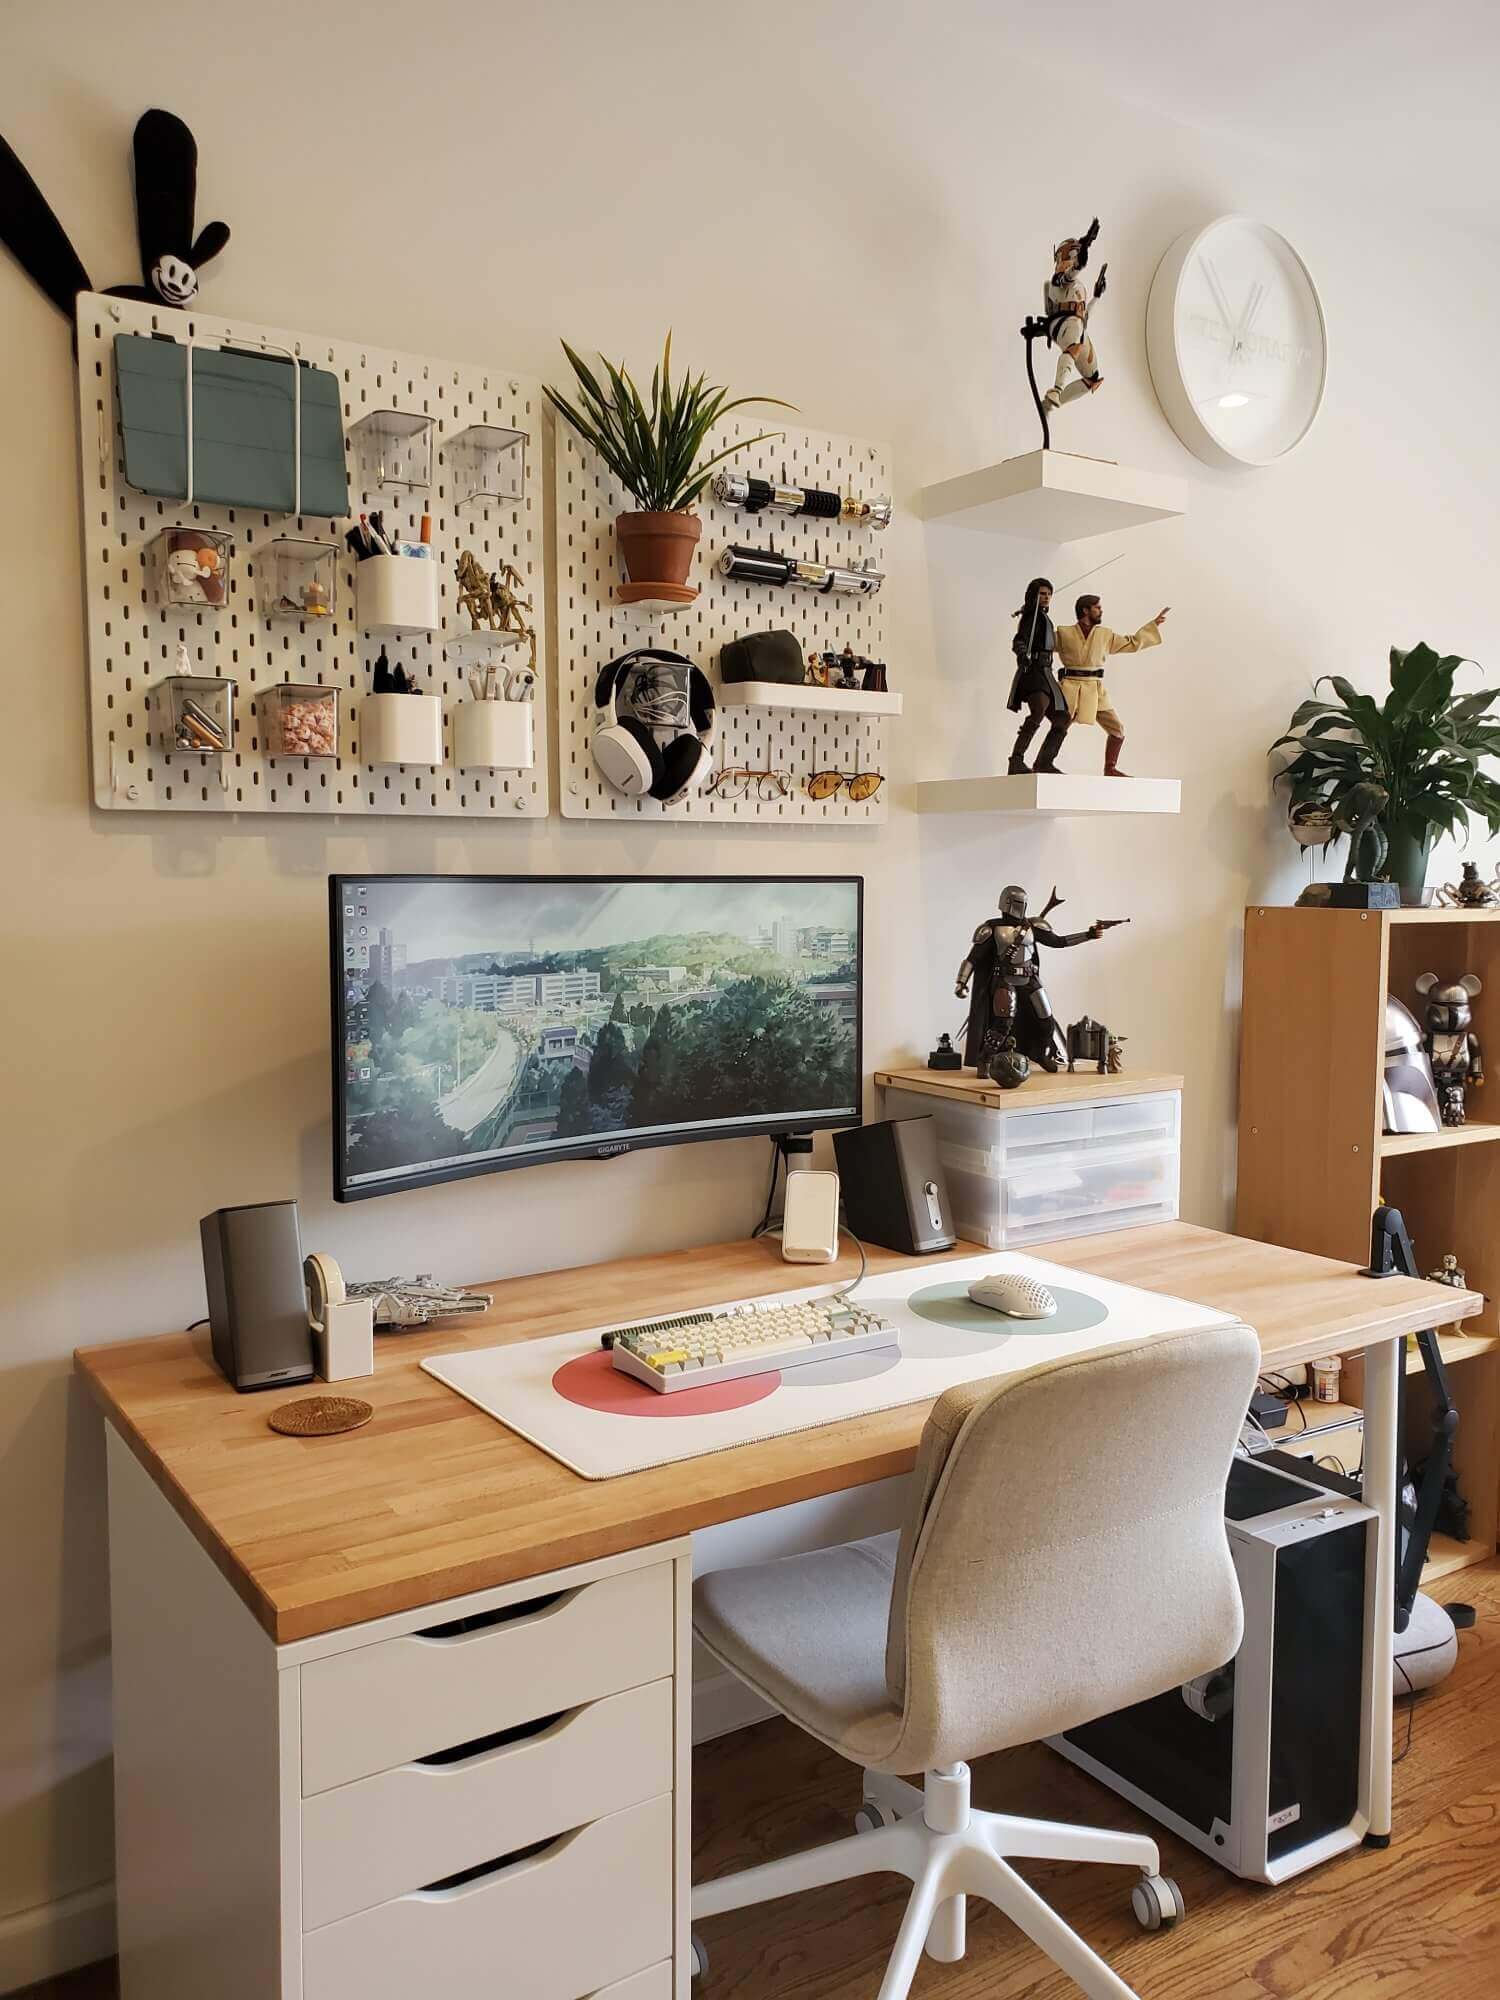 WORK FROM HOME DESK SET UP  aesthetic desk tour, productive workspace, wfh  essentials 